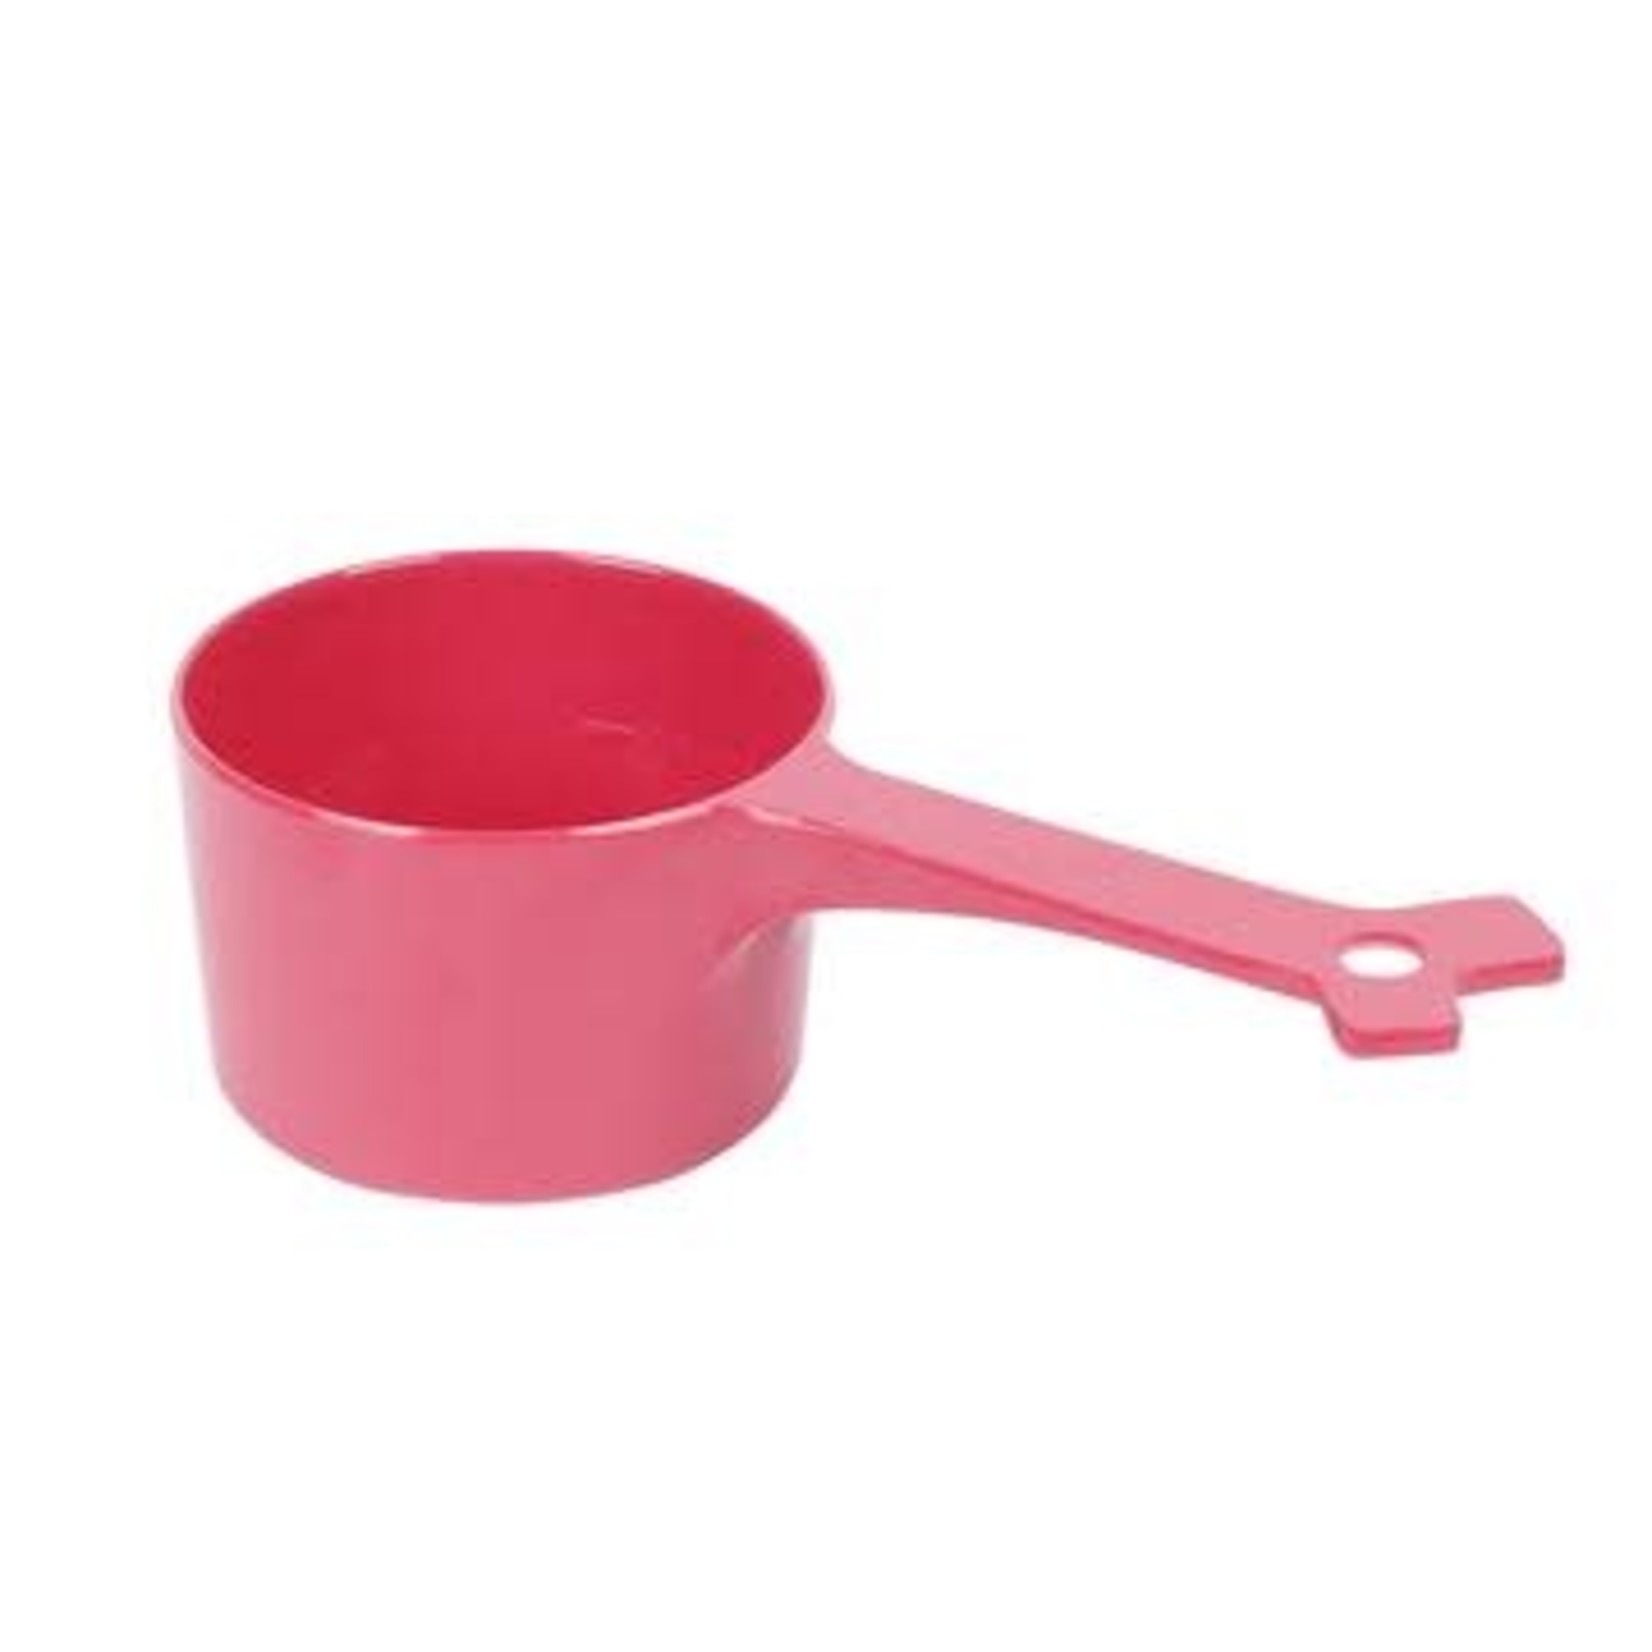 Messy Mutts Melamine Food Scoops (1 cup capacity)